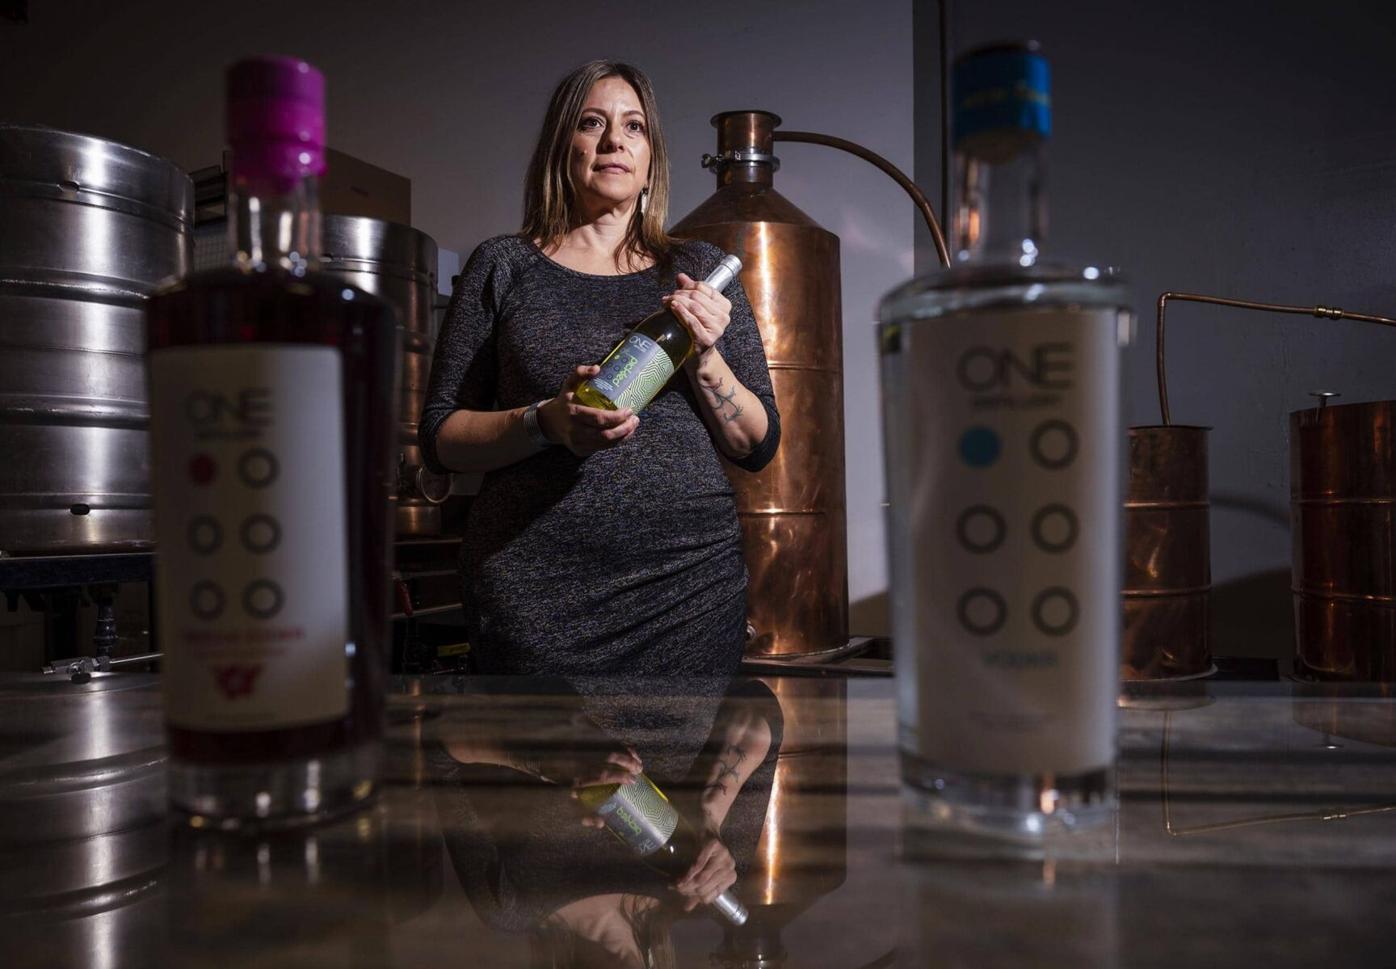 A distillery that produces a one-of-a-kind gin has just opened in N.J. 